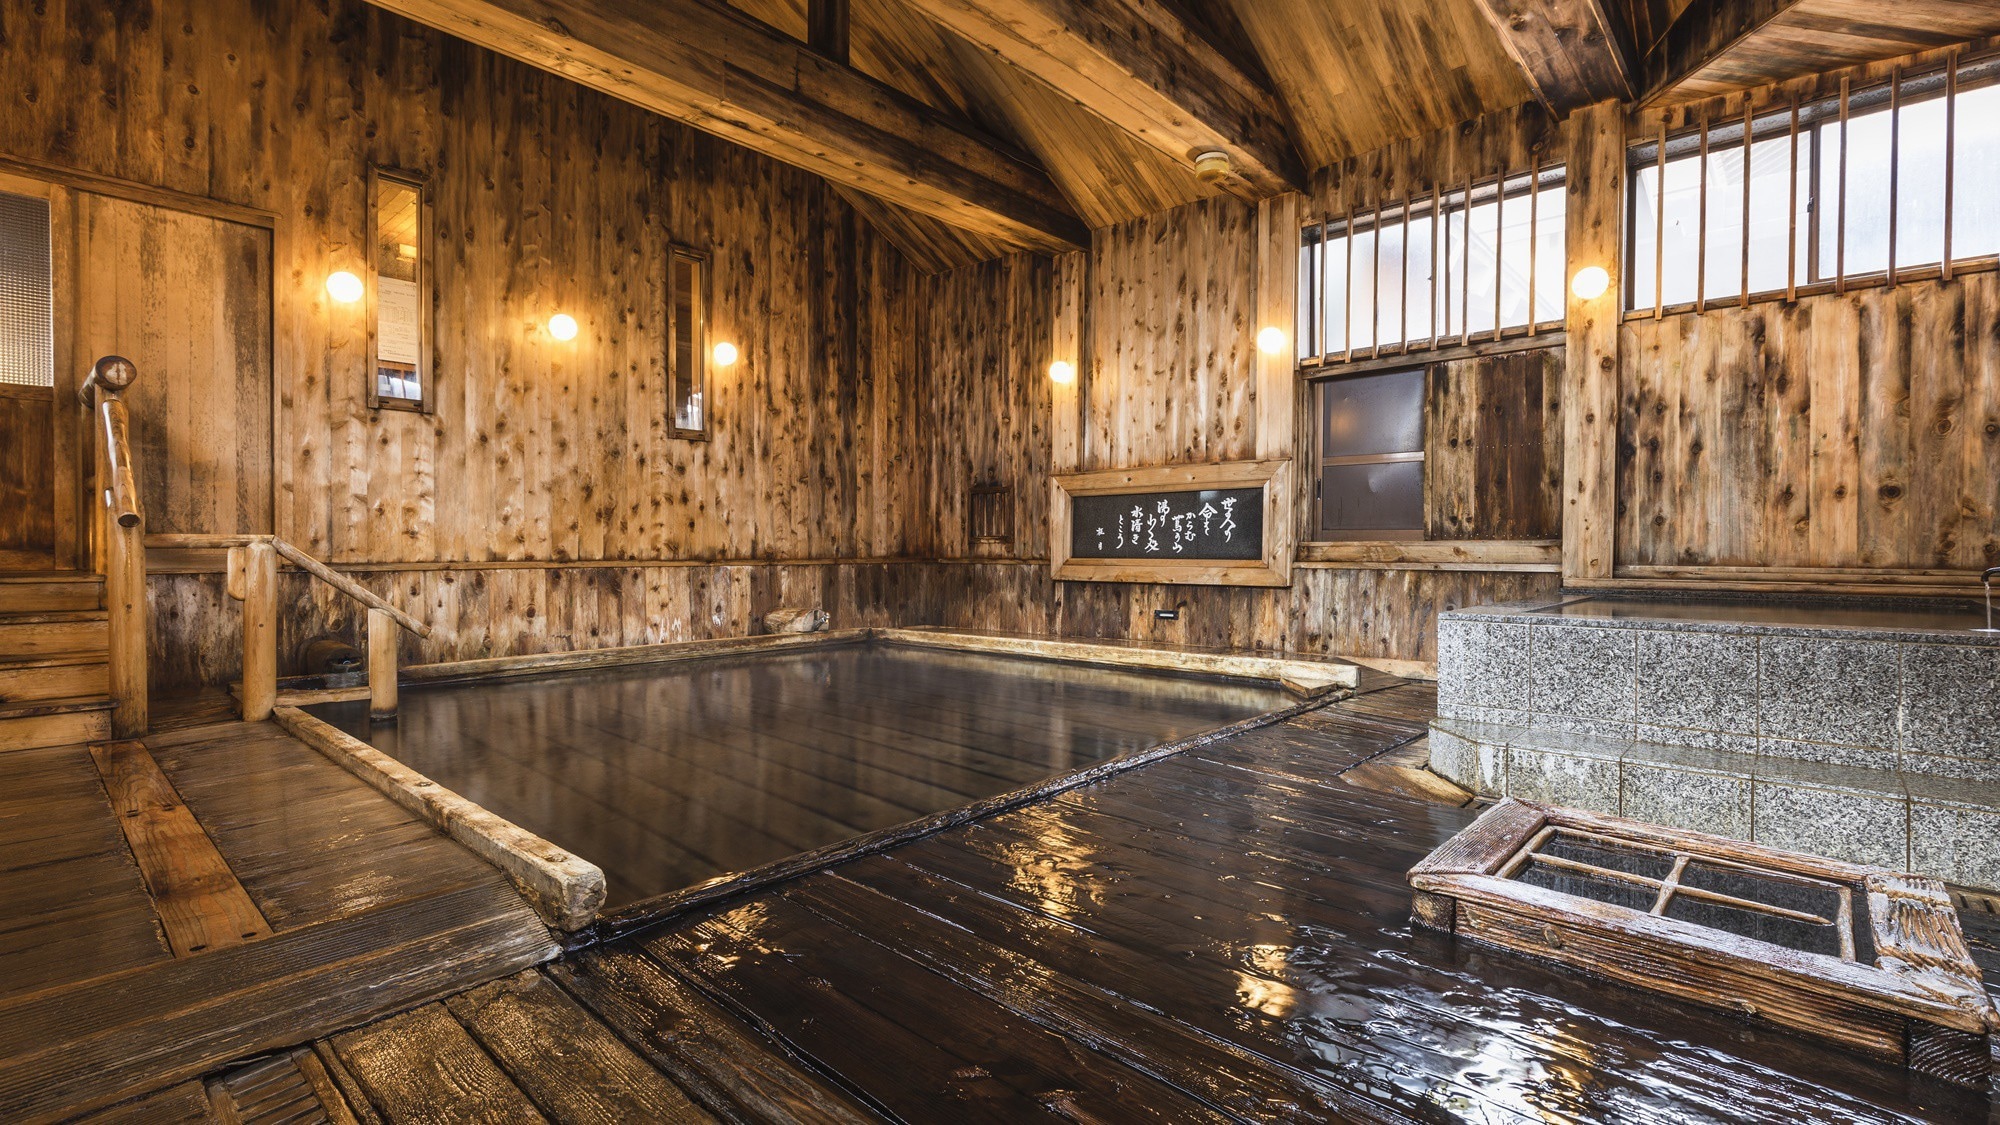 [Large communal bath] "Kuan no yu" A secret hot spring that was opened in the Heian period. The old atmosphere remains.